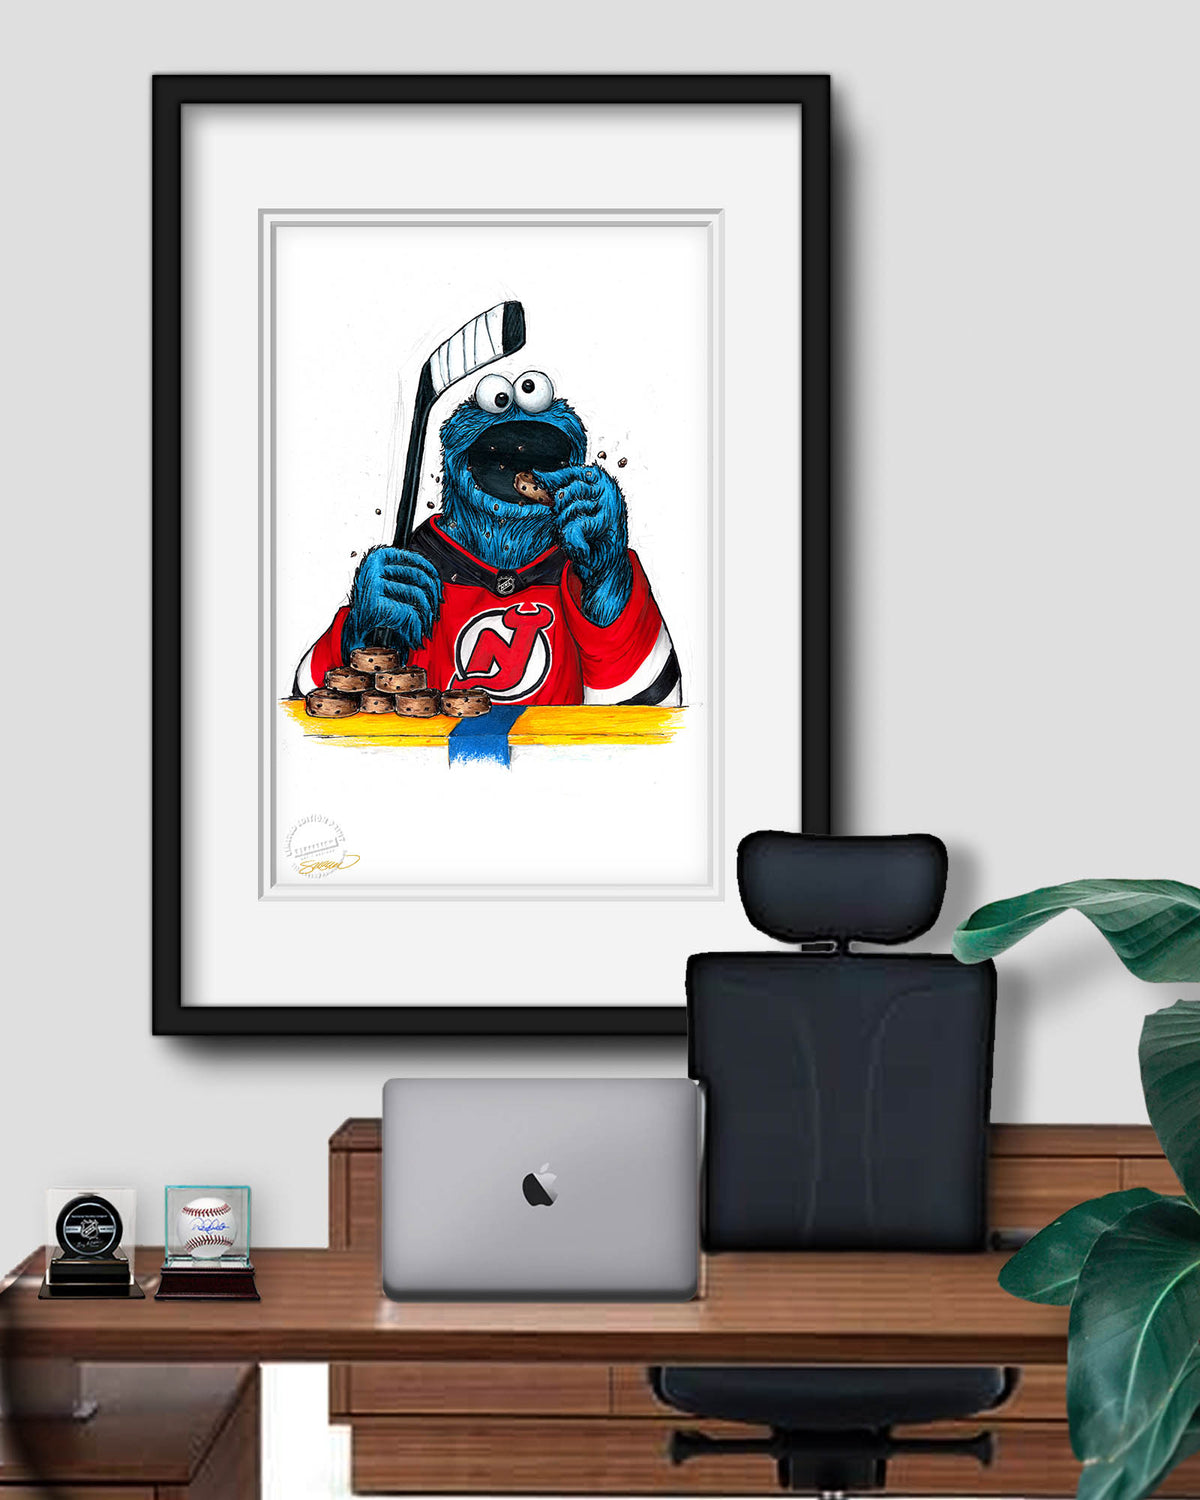 Cookie Monster x NHL Devils Limited Edition Fine Art Print